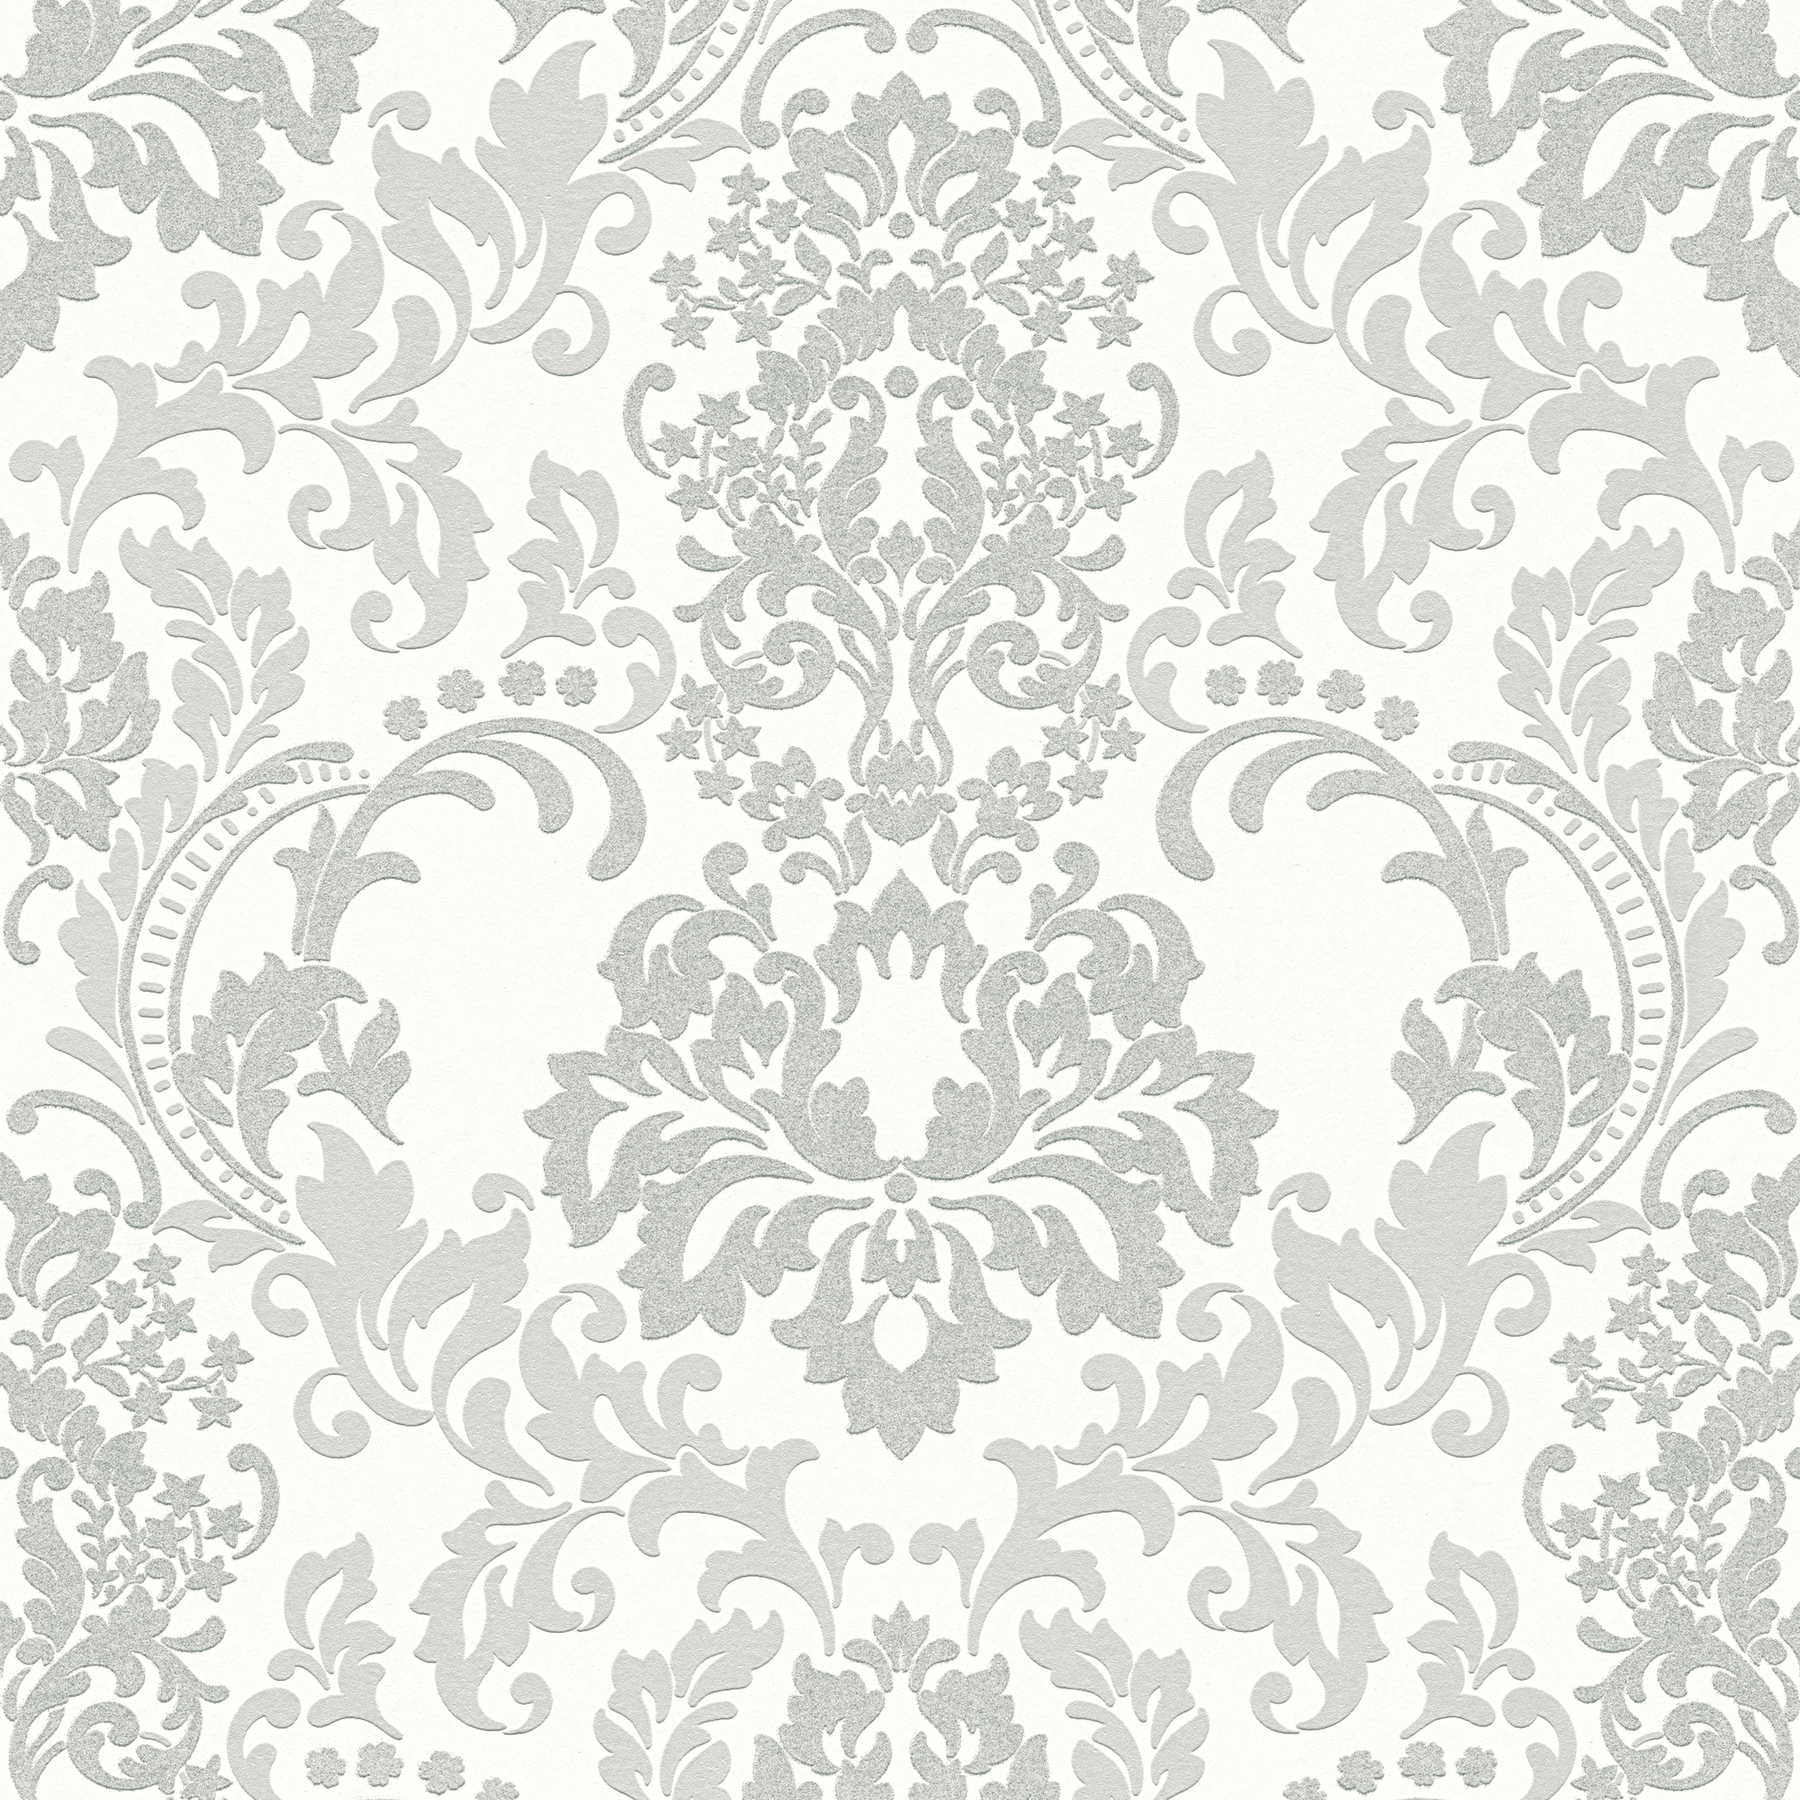 Baroque wallpaper with glitter effect - grey, white
